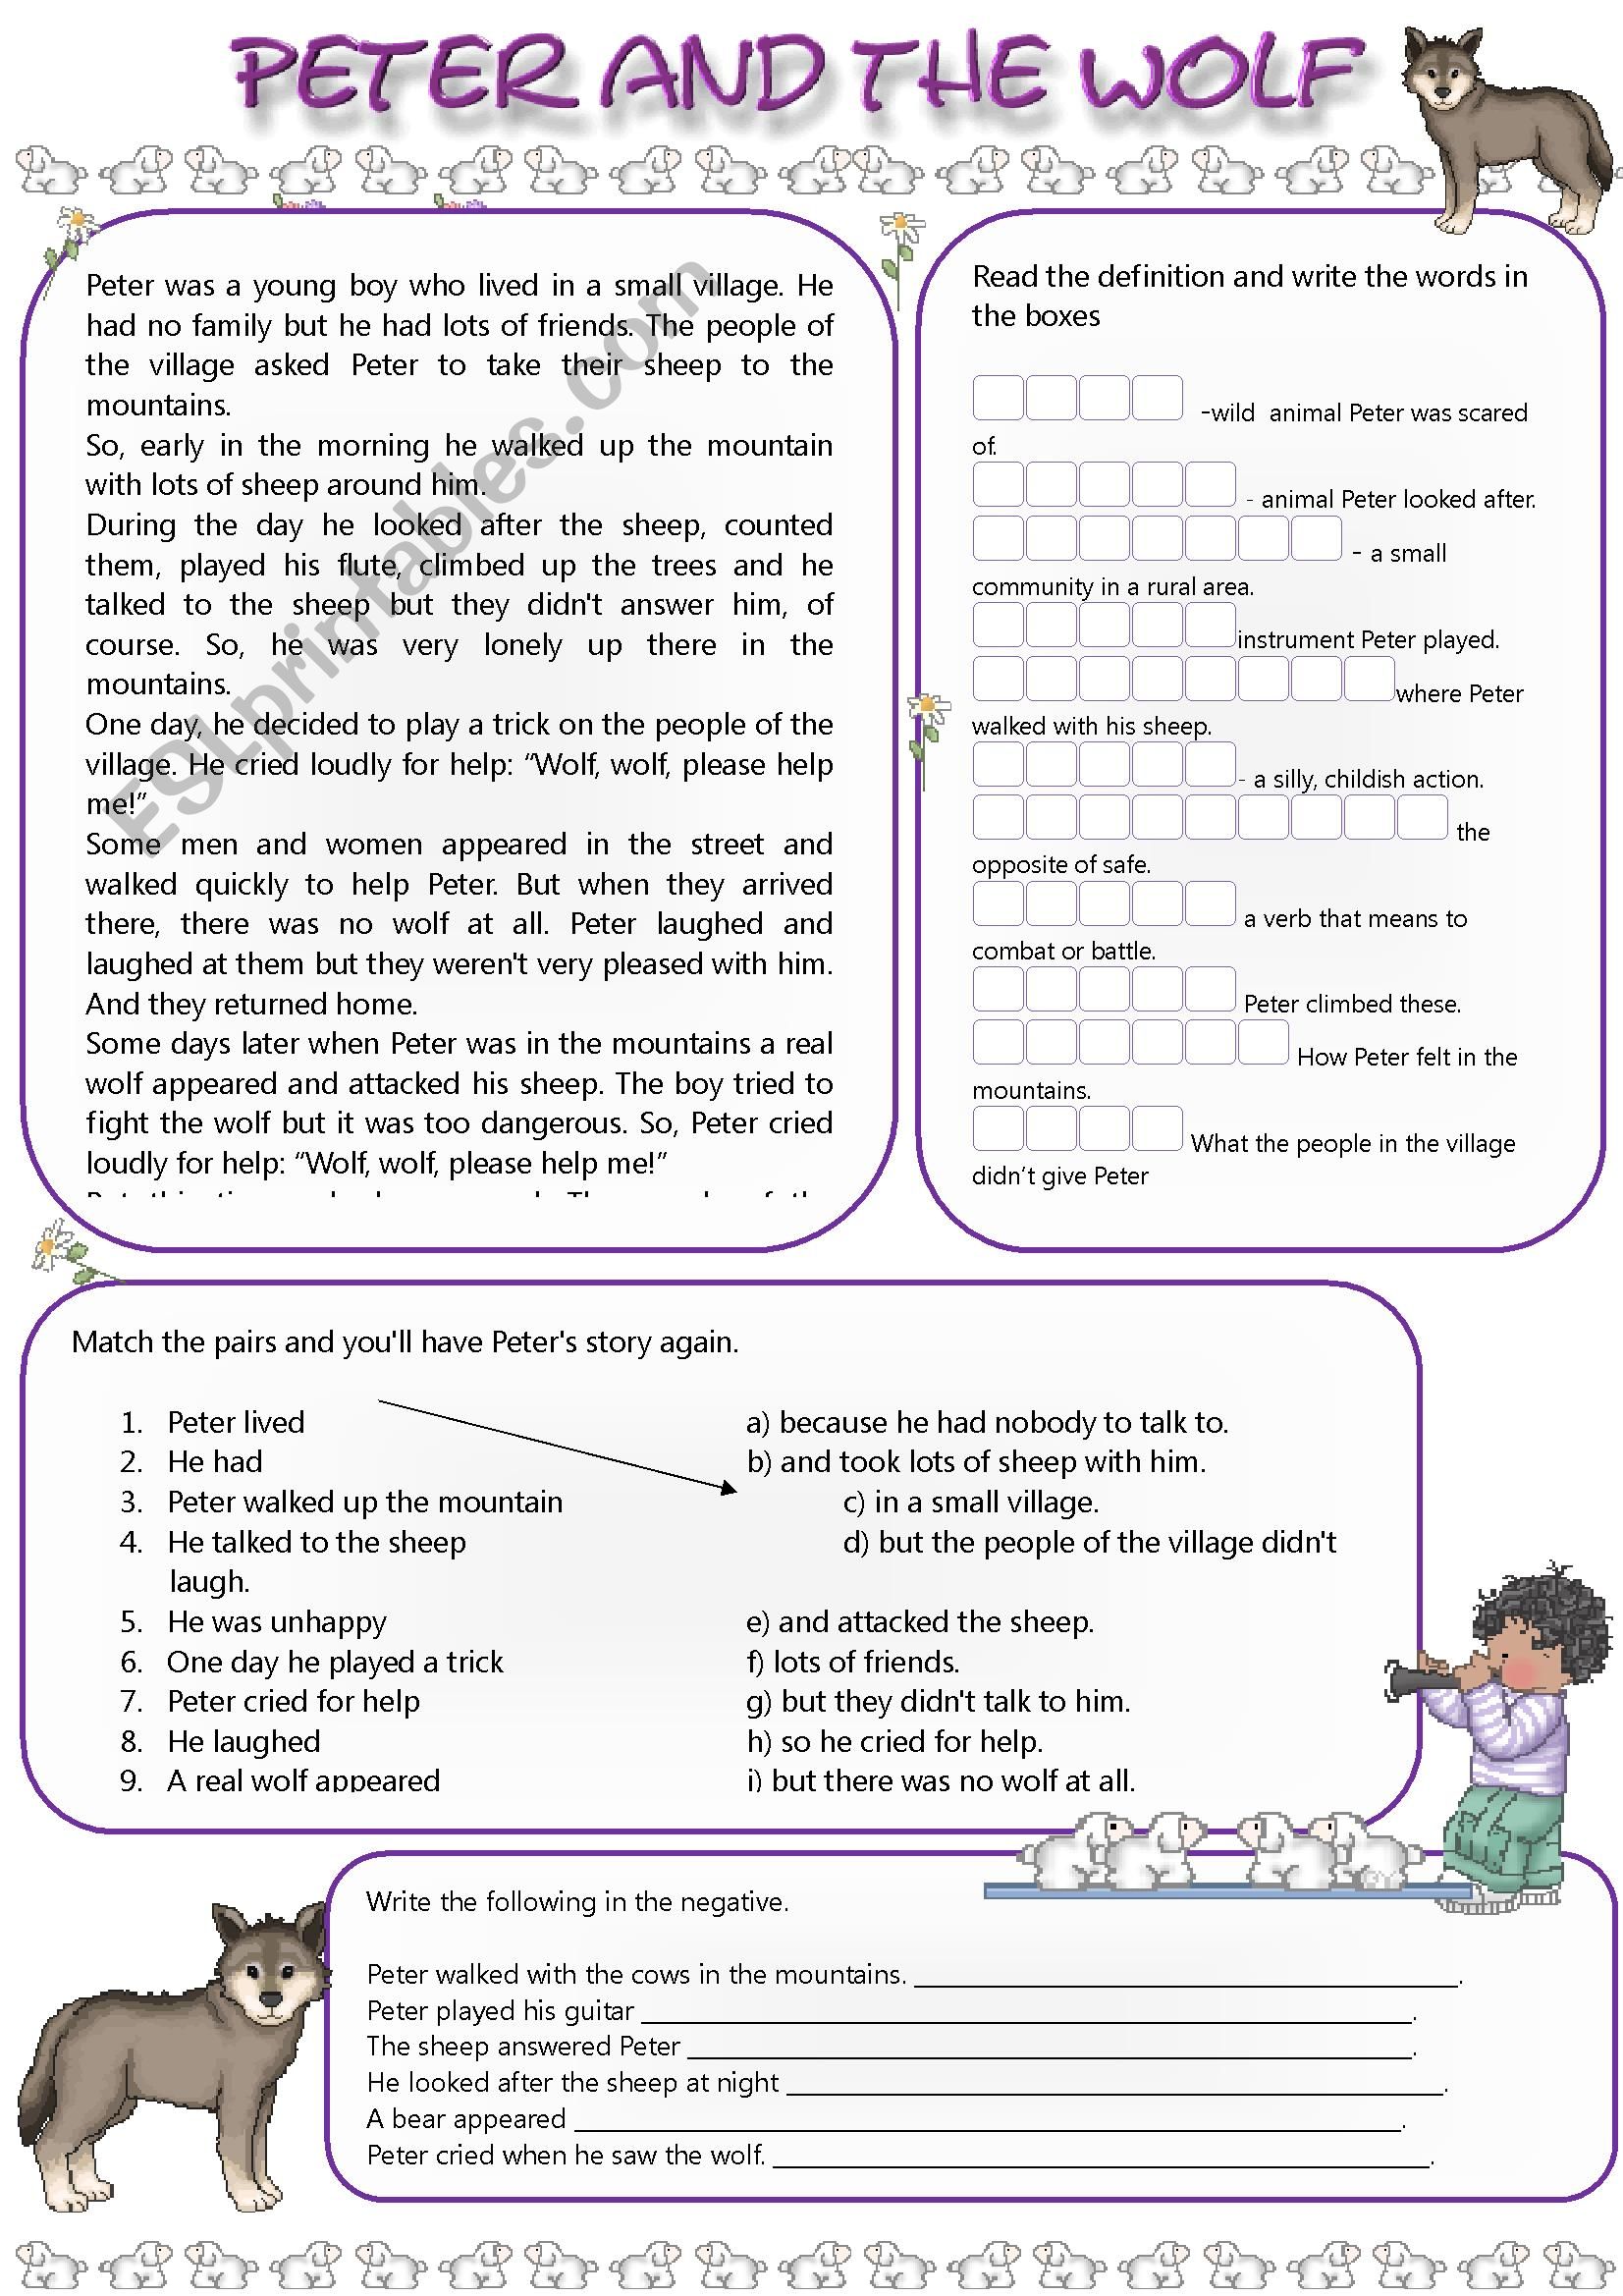 Peter and The Wolf - ESL worksheet by mandysantos With Peter And The Wolf Worksheet